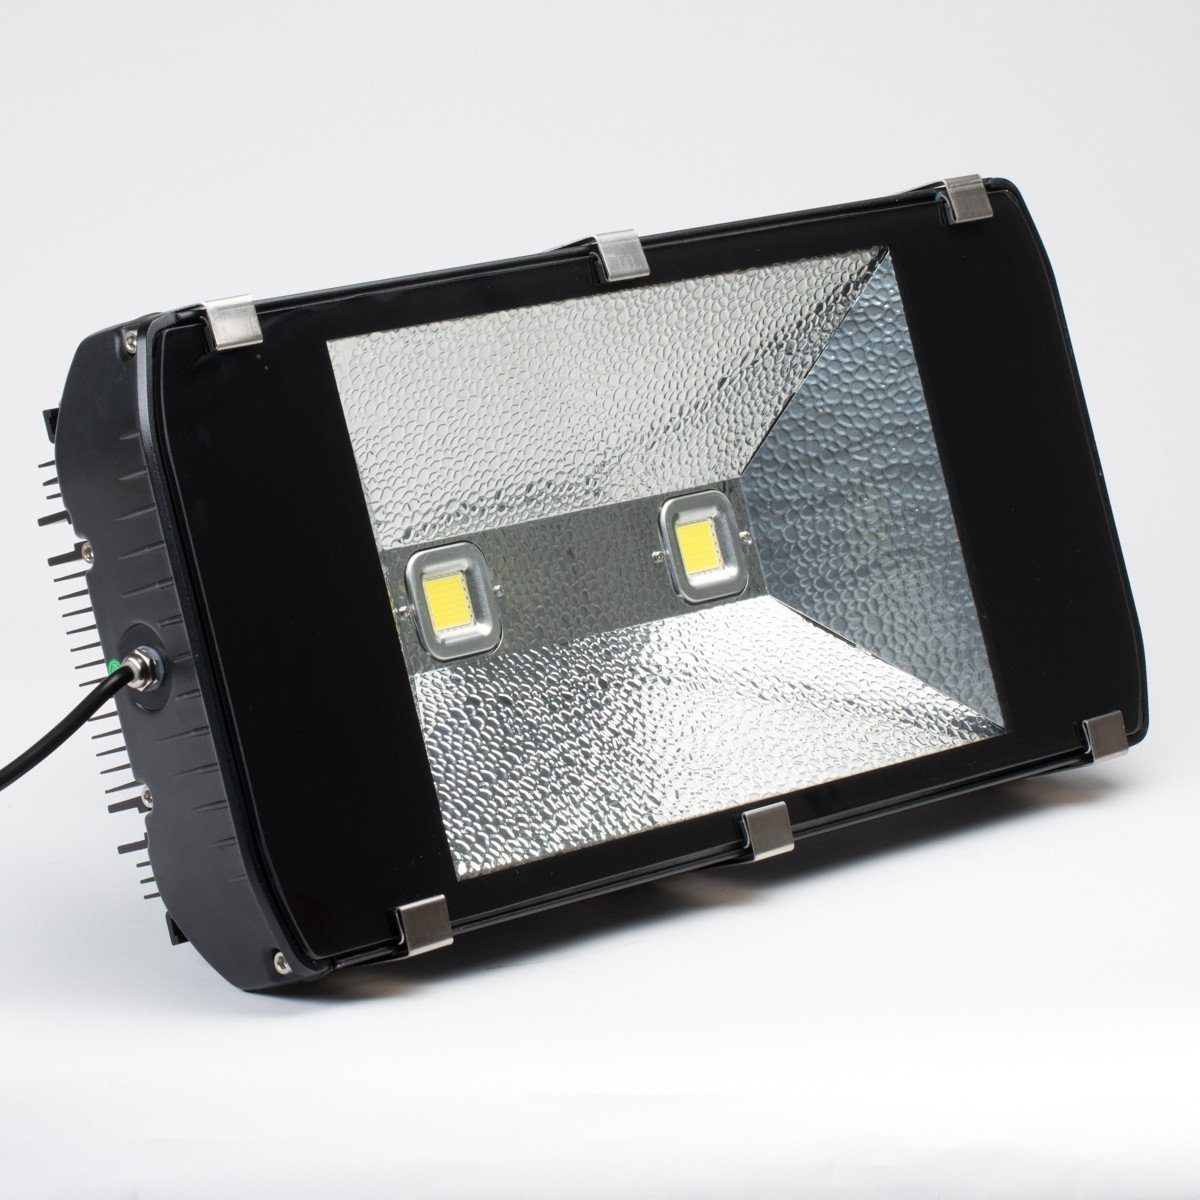 angled view of rectangular outdoor led flood light in black housing with clear front lens and visible led chips in center